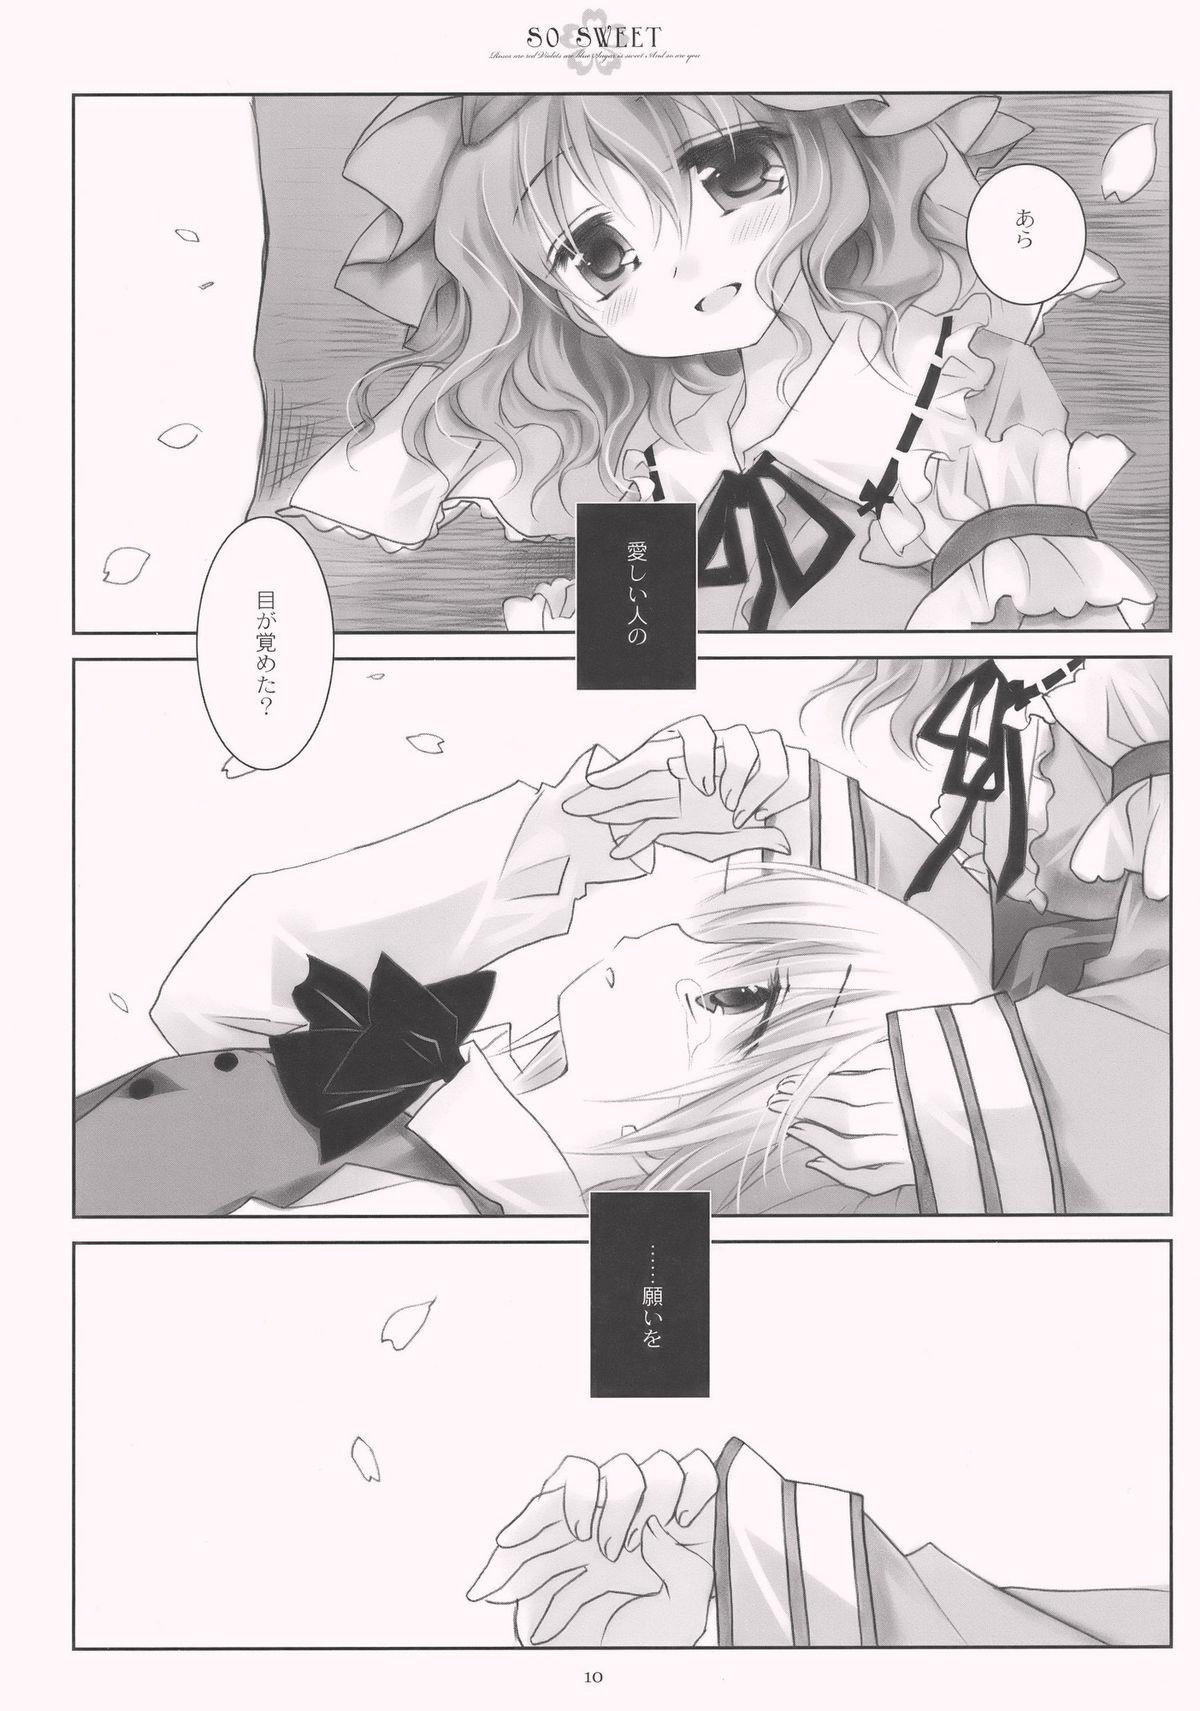 Brazzers SO SWEET - Touhou project Por - Page 10